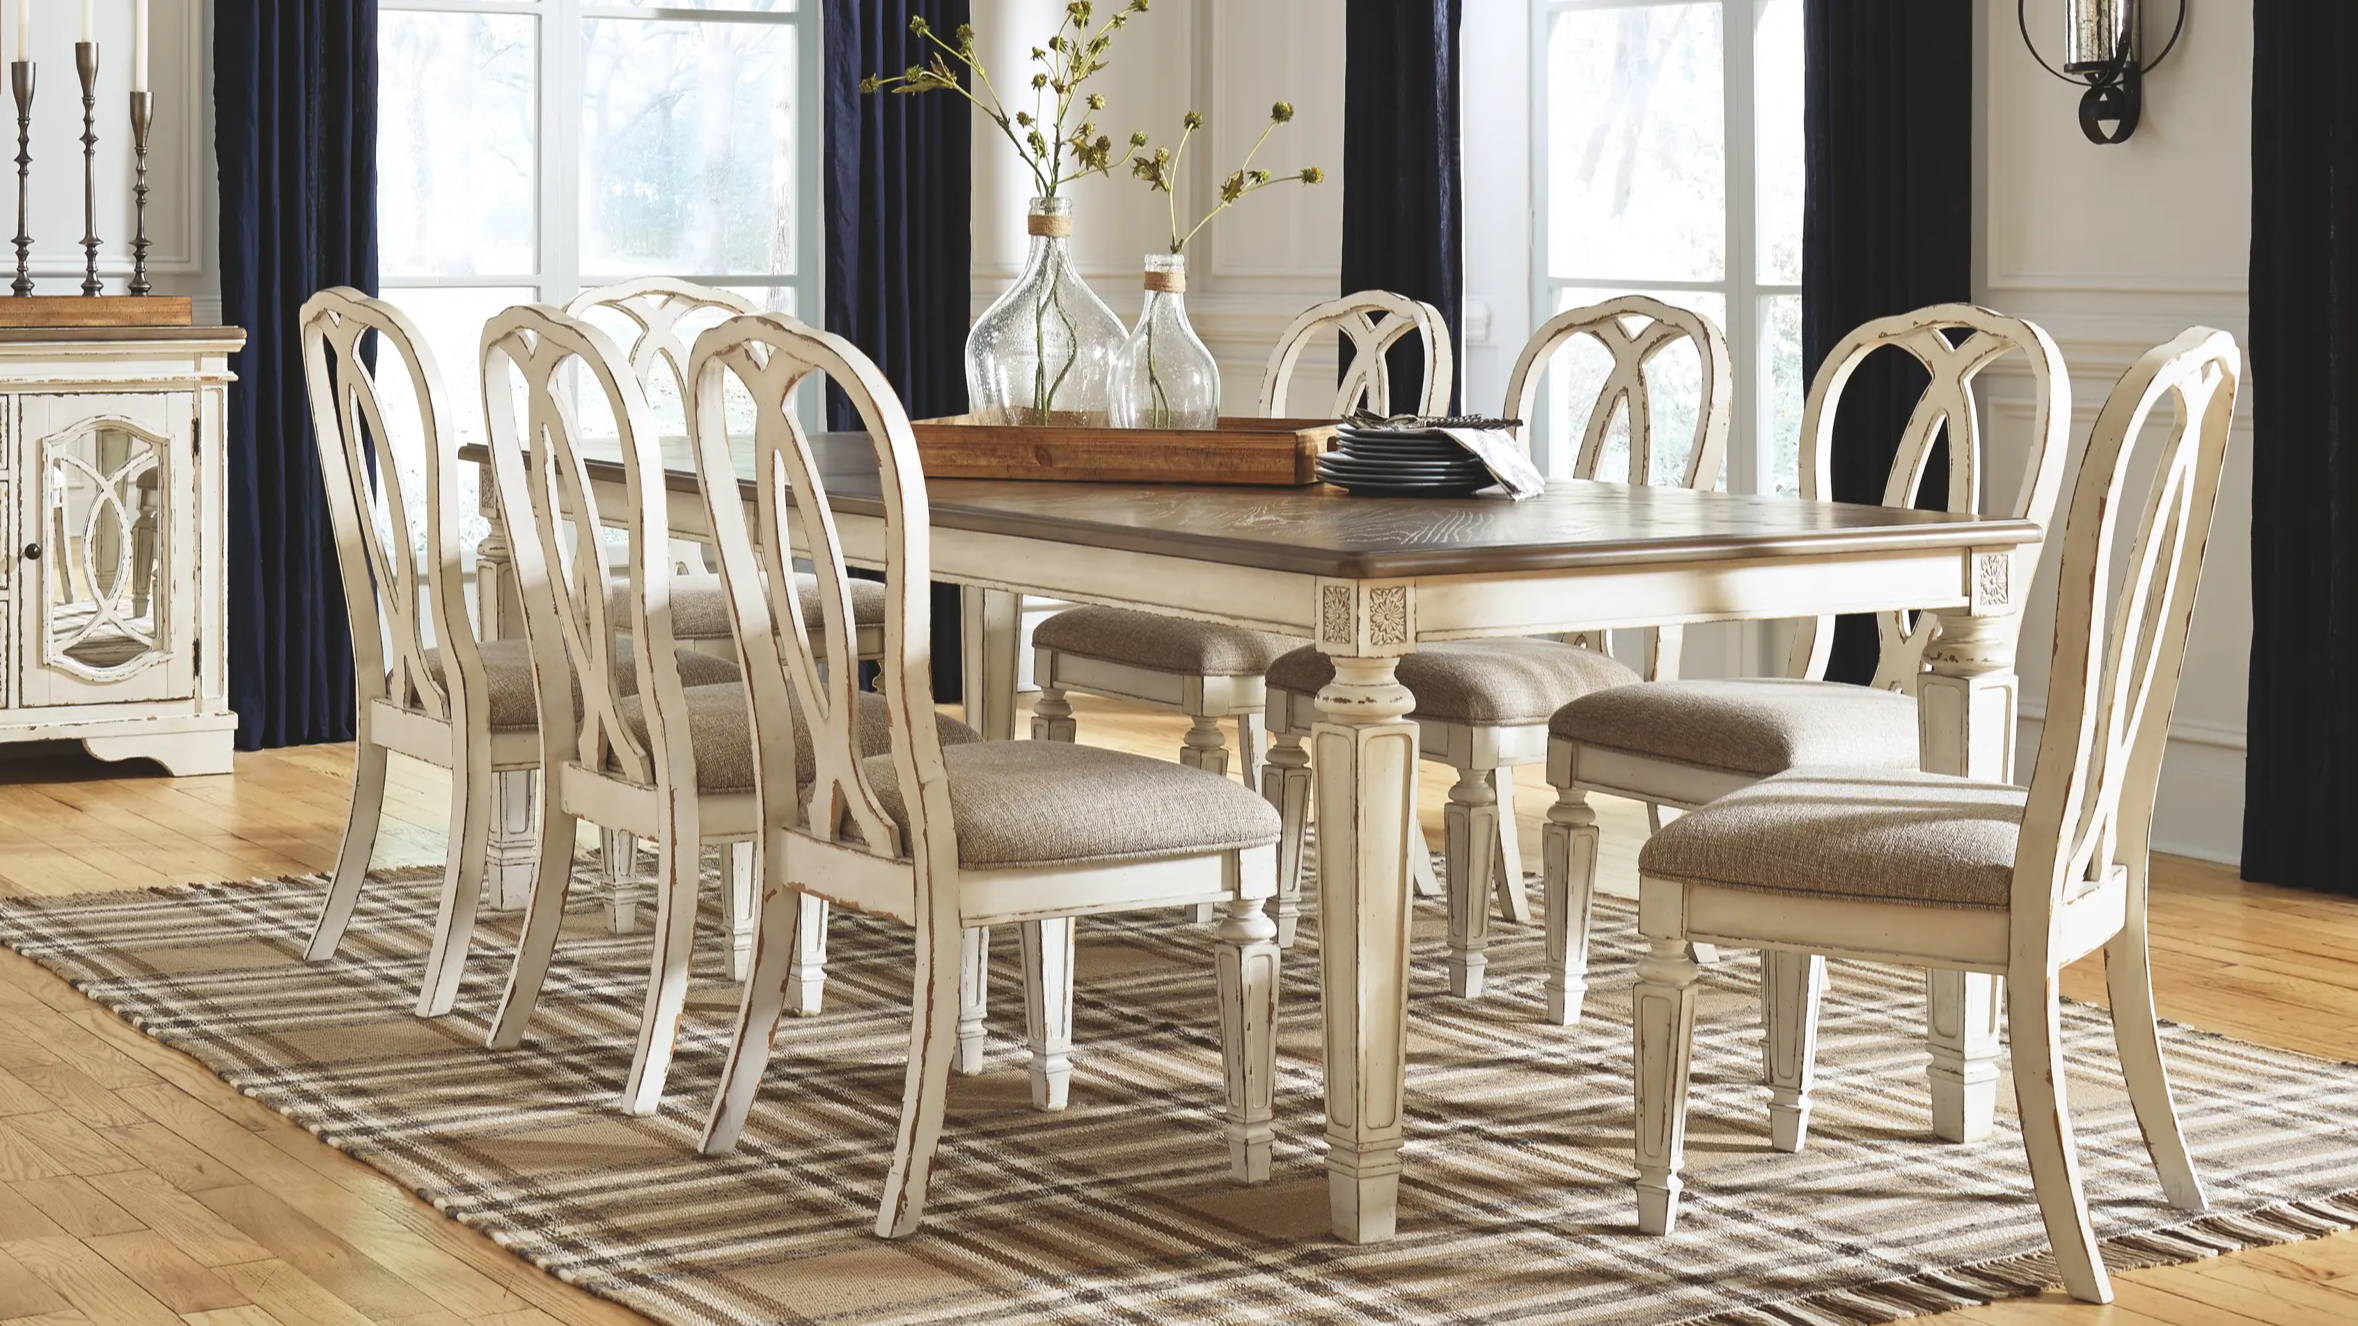 A farmhouse-style dining table with matching decor.